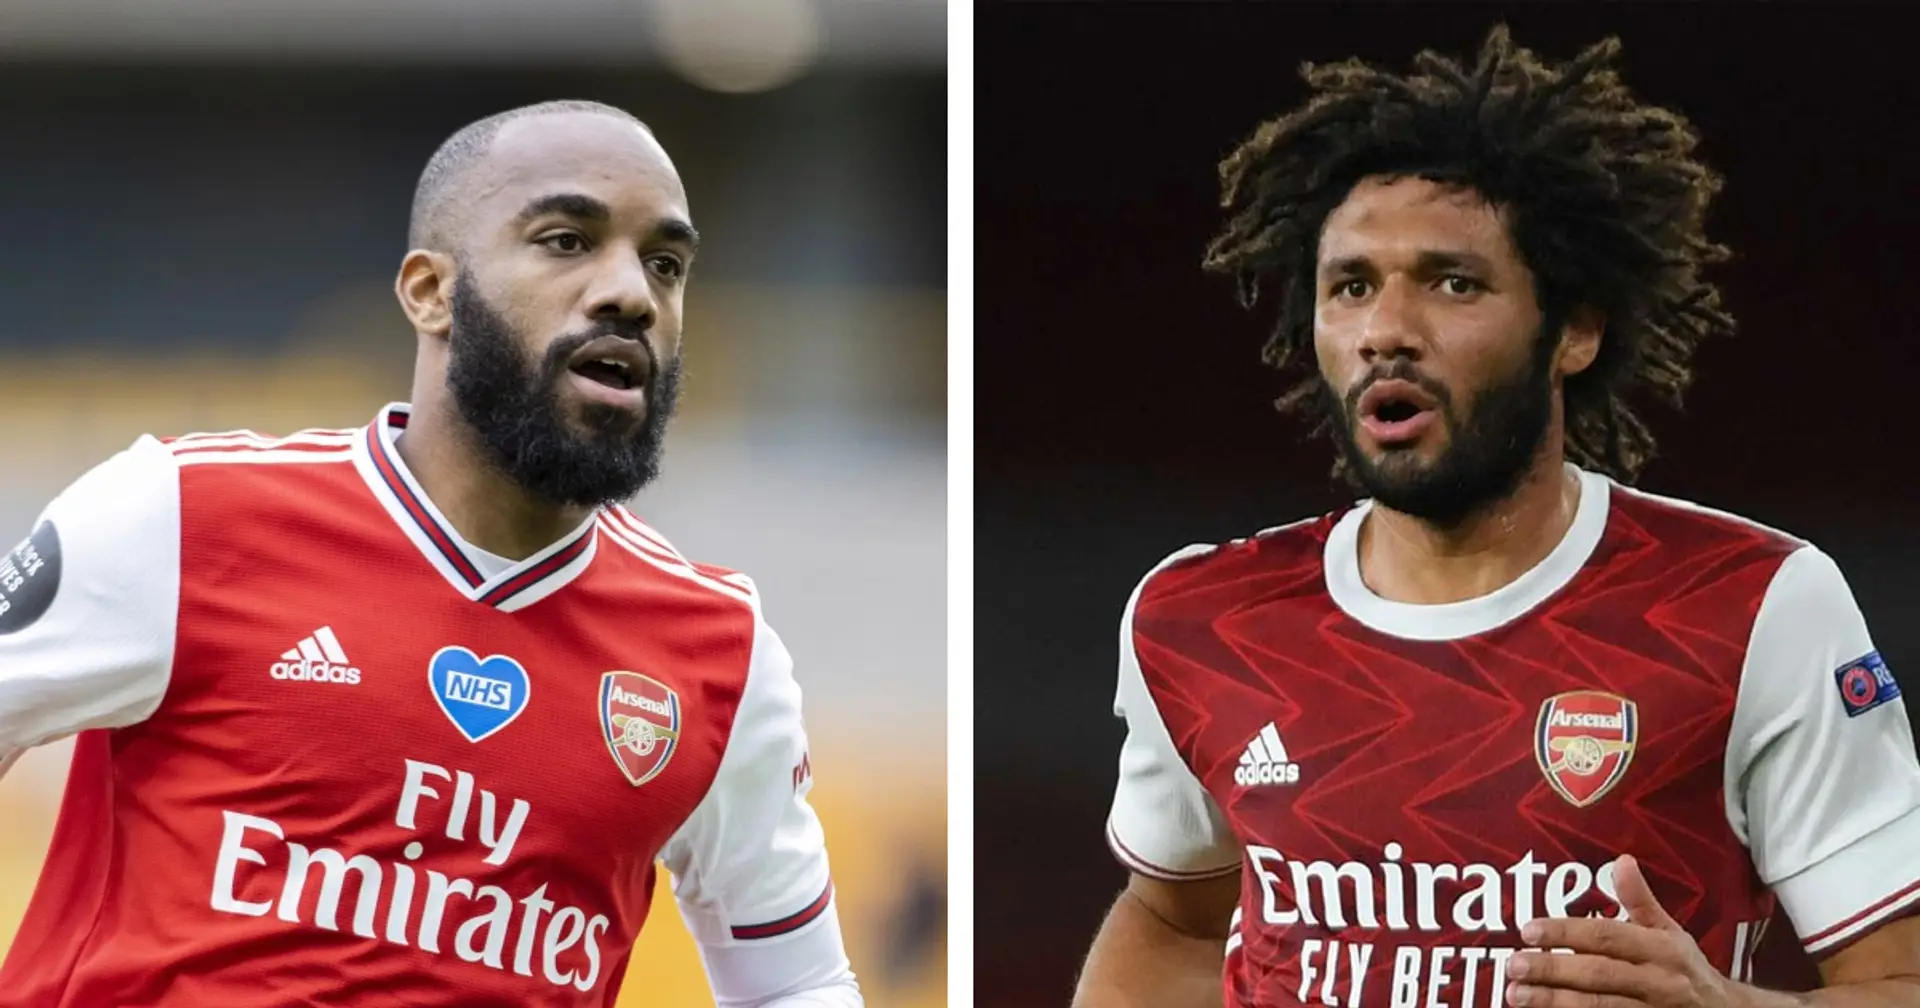 Lacazette, Elneny and 11 more players with 1.5 years or less left on their contracts